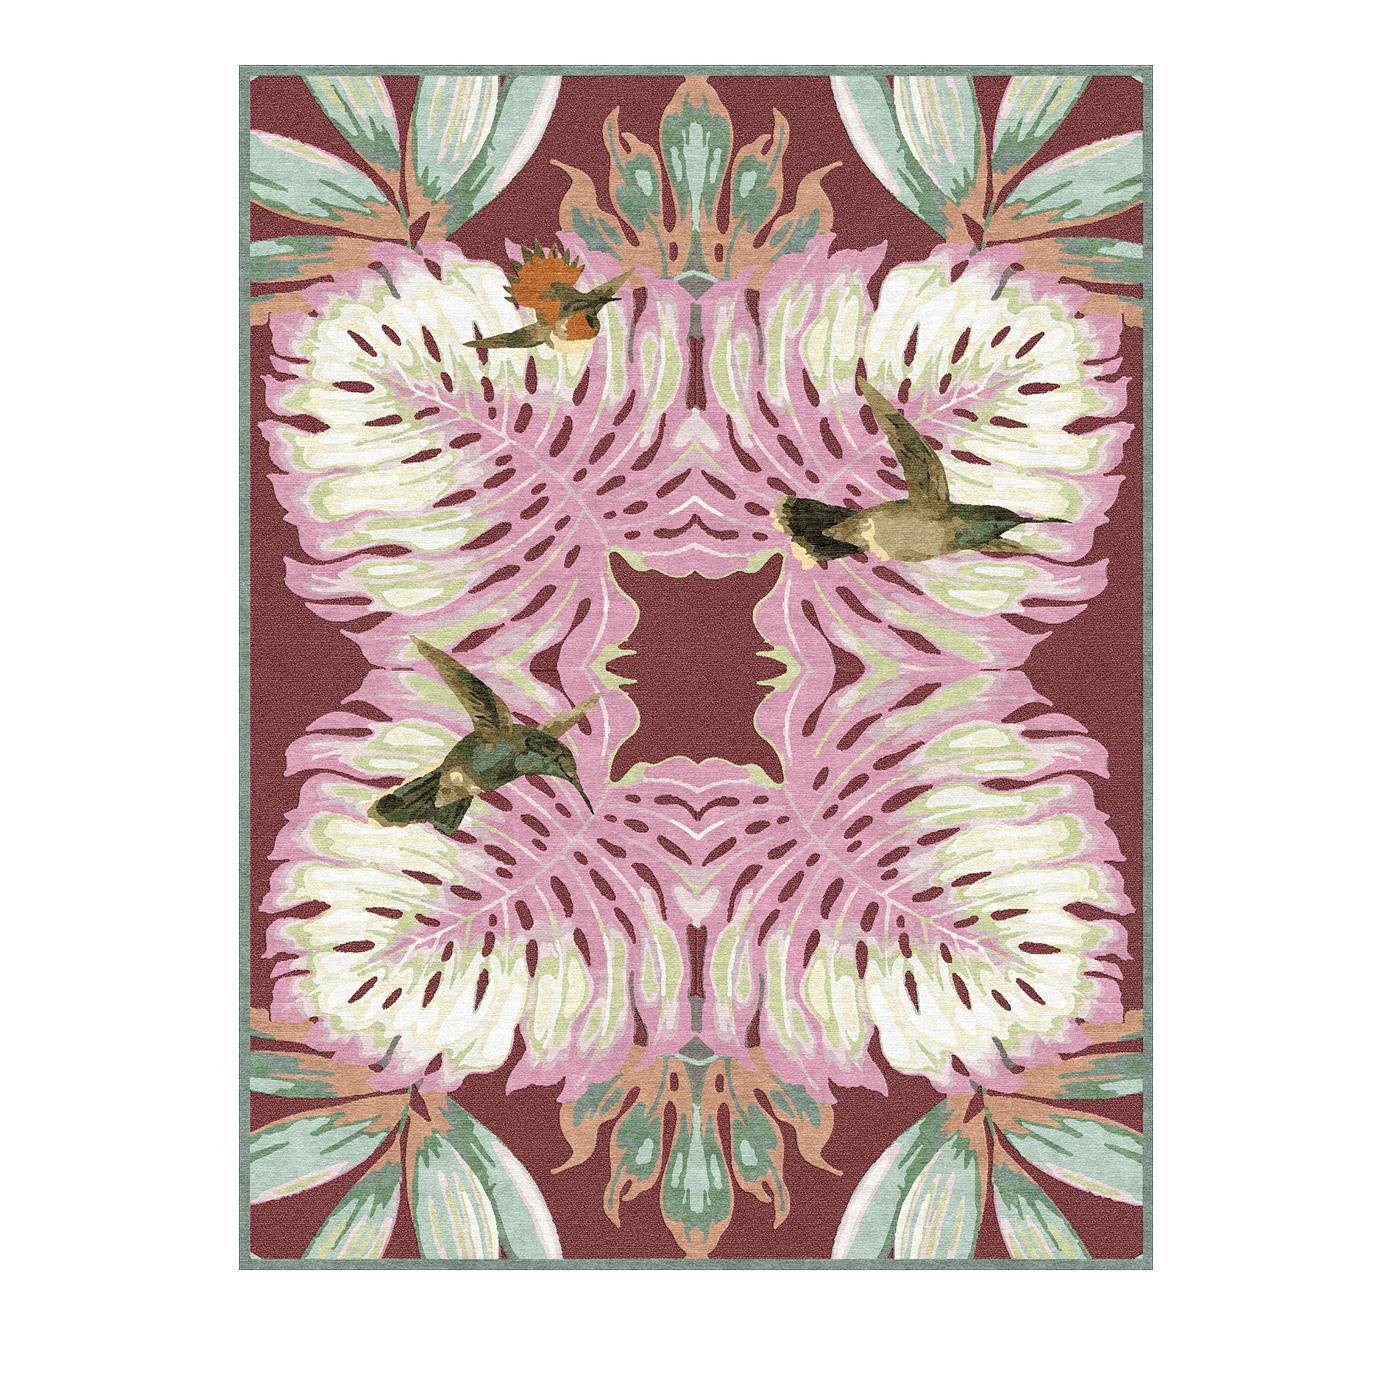 A charming and sophisticated work of art, this hand knotted rug is a kaleidoscope of colors and motifs. The psychedelic array of green leaves and white palms outlined in bright pink form an intricate, mirrored image set against a deep fuchsia